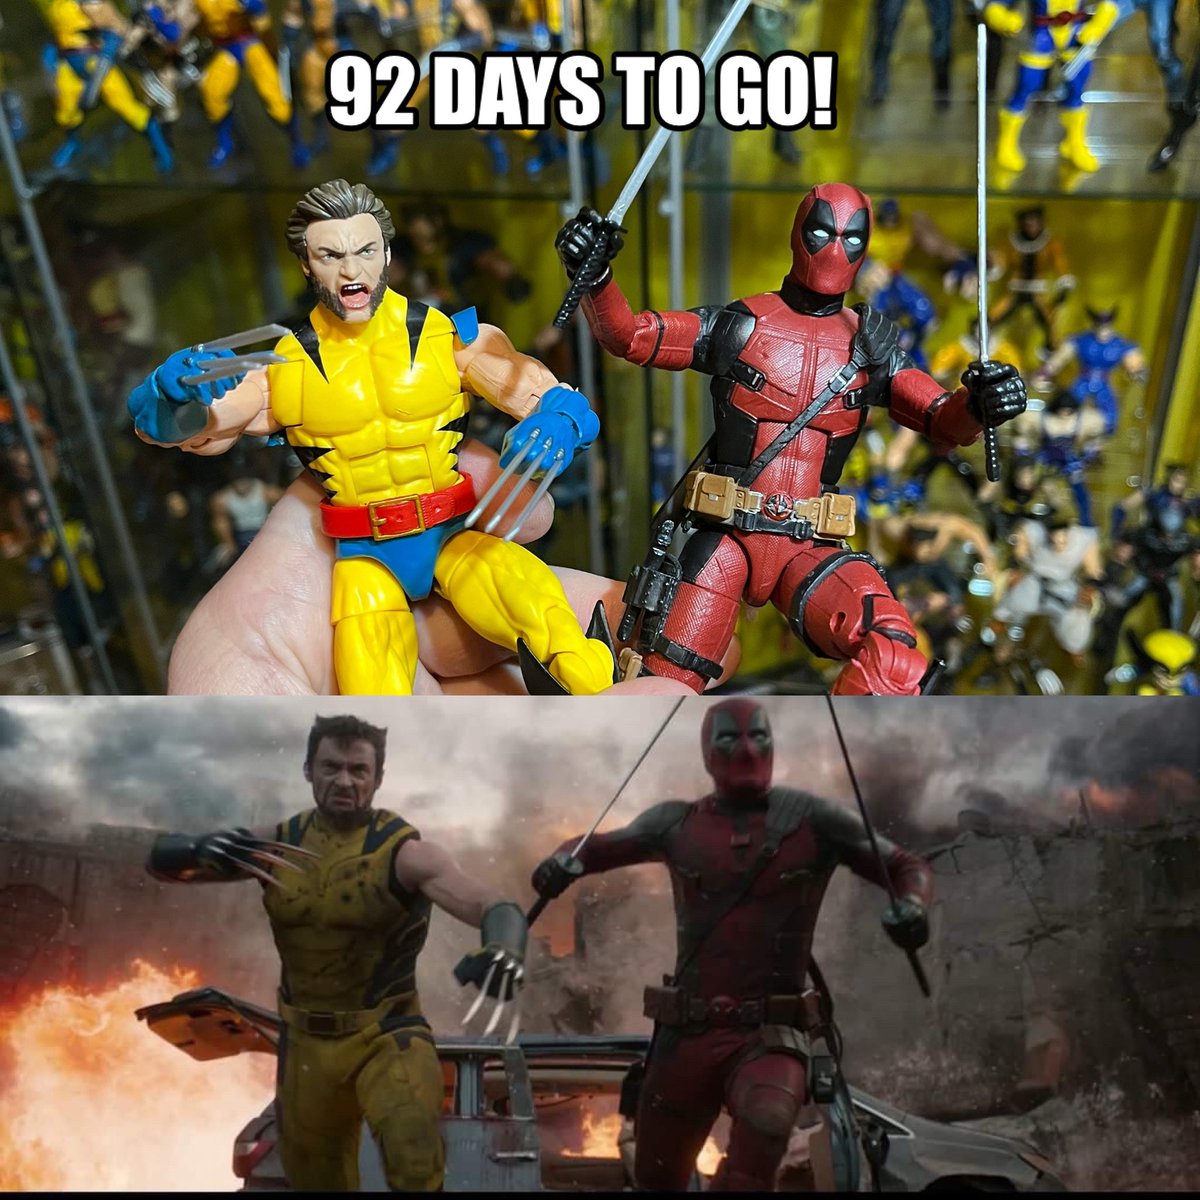 GO FIGURE! #WolverstevesCountdown continues at 576 days counting & posting to #Deadpool & #Wolverine 92 DAYS TO GO! #LFG on a multiversal road trip with #DeadpoolAndWolverine !